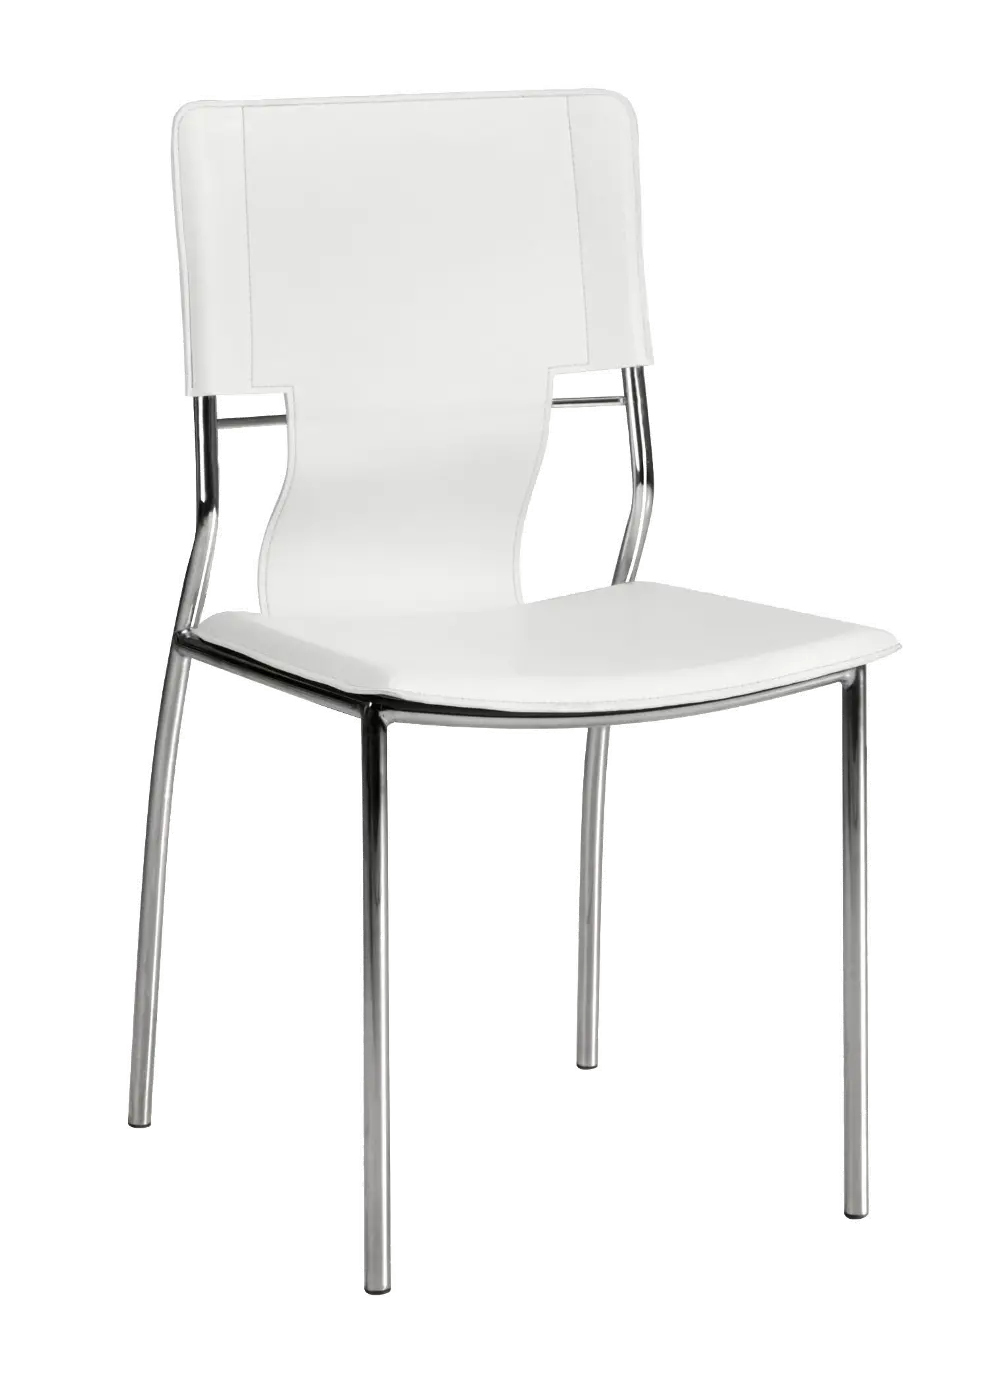 Modern White and Chrome Dining Room Chair (Set of 4) - Trafico-1